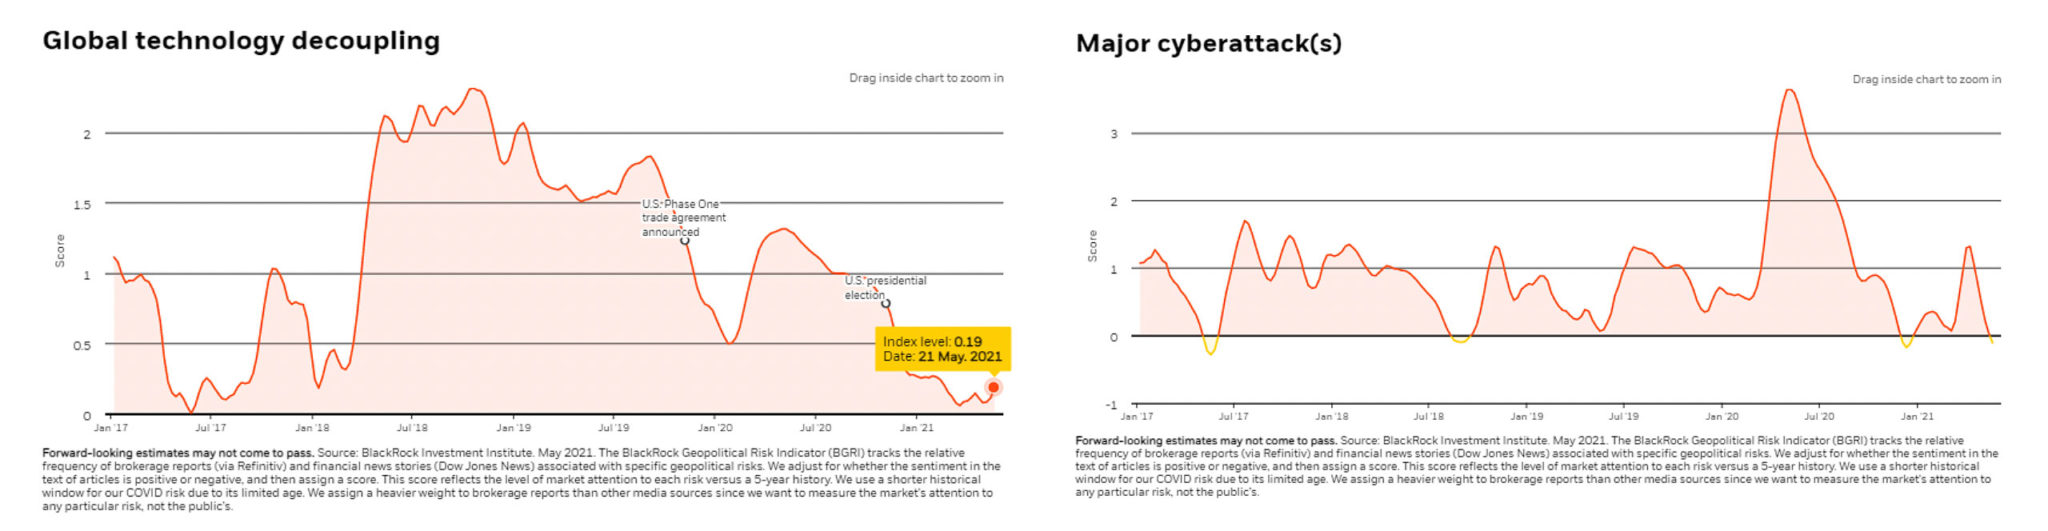 Gráficas Global technology decoupling - Meor cyberattack(s)